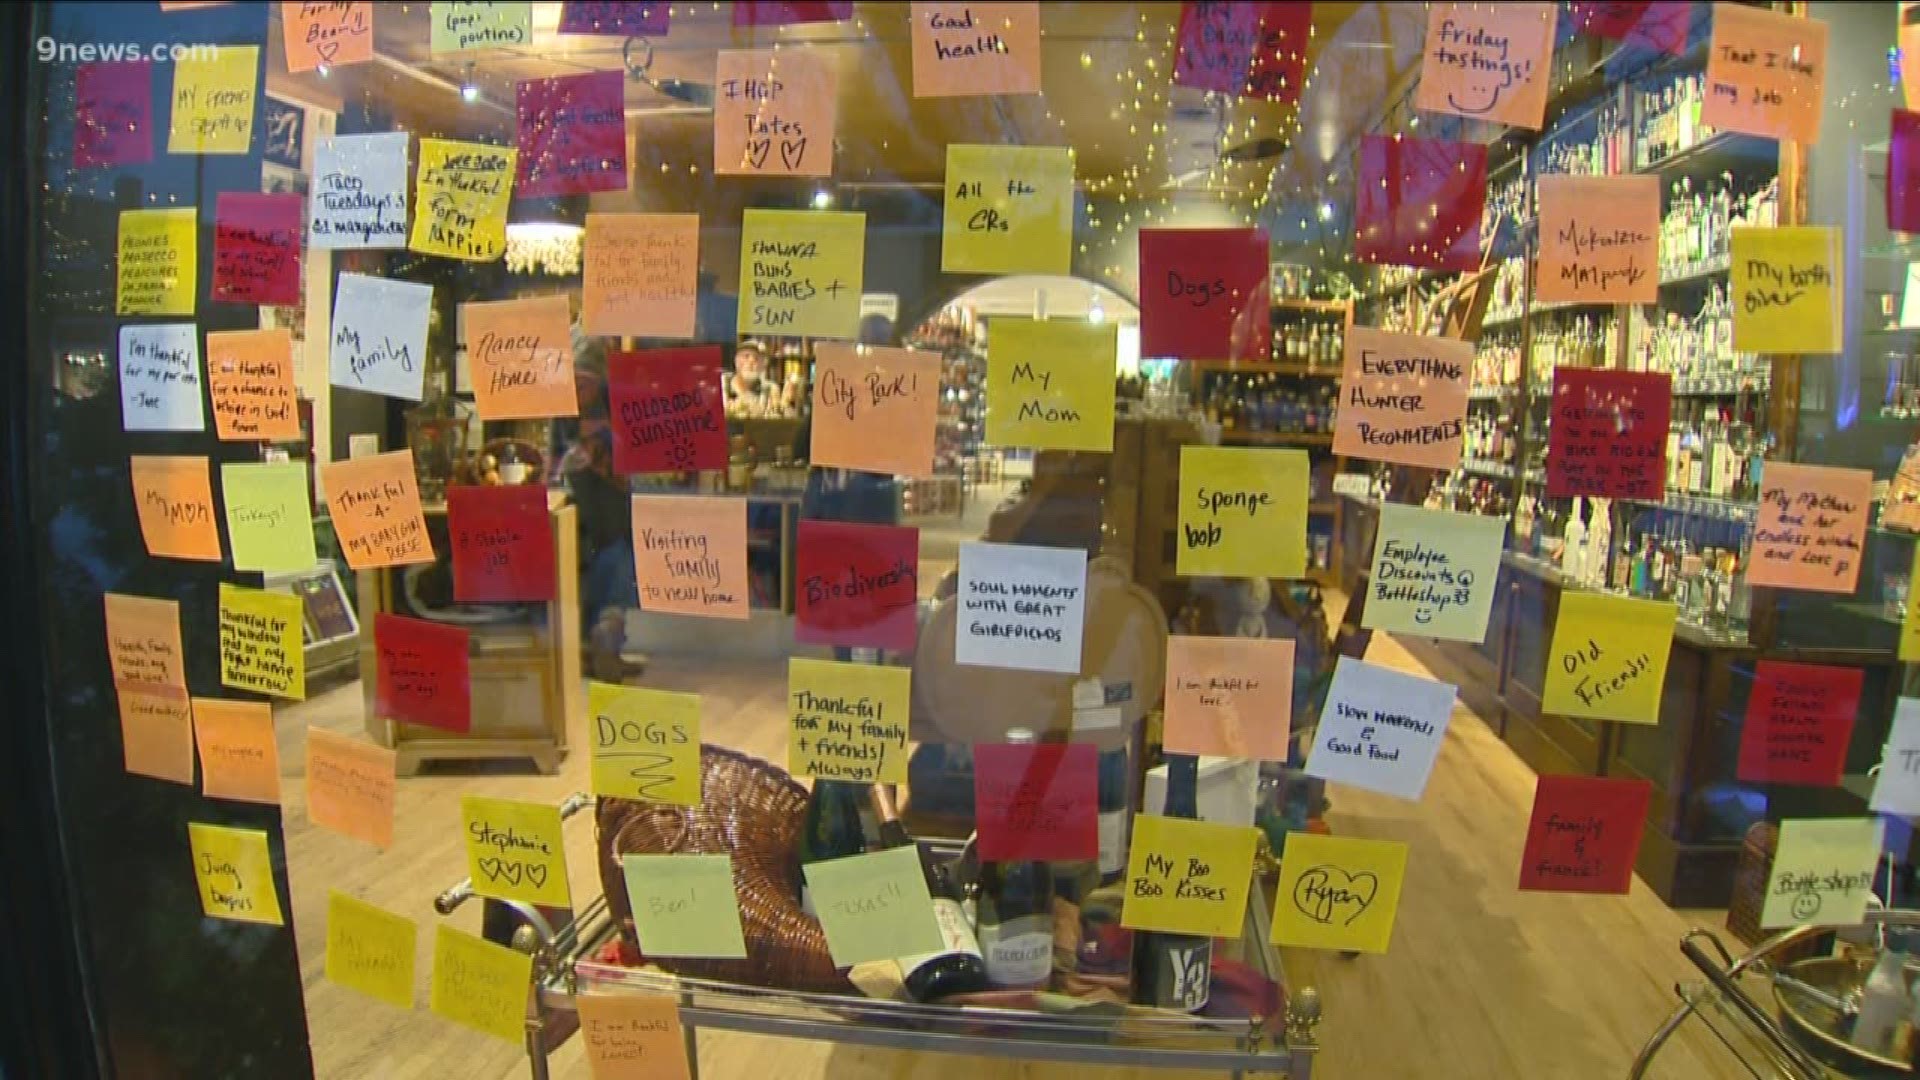 A local liquor store's window has become a conversation starter thanks to dozens of sticky notes.